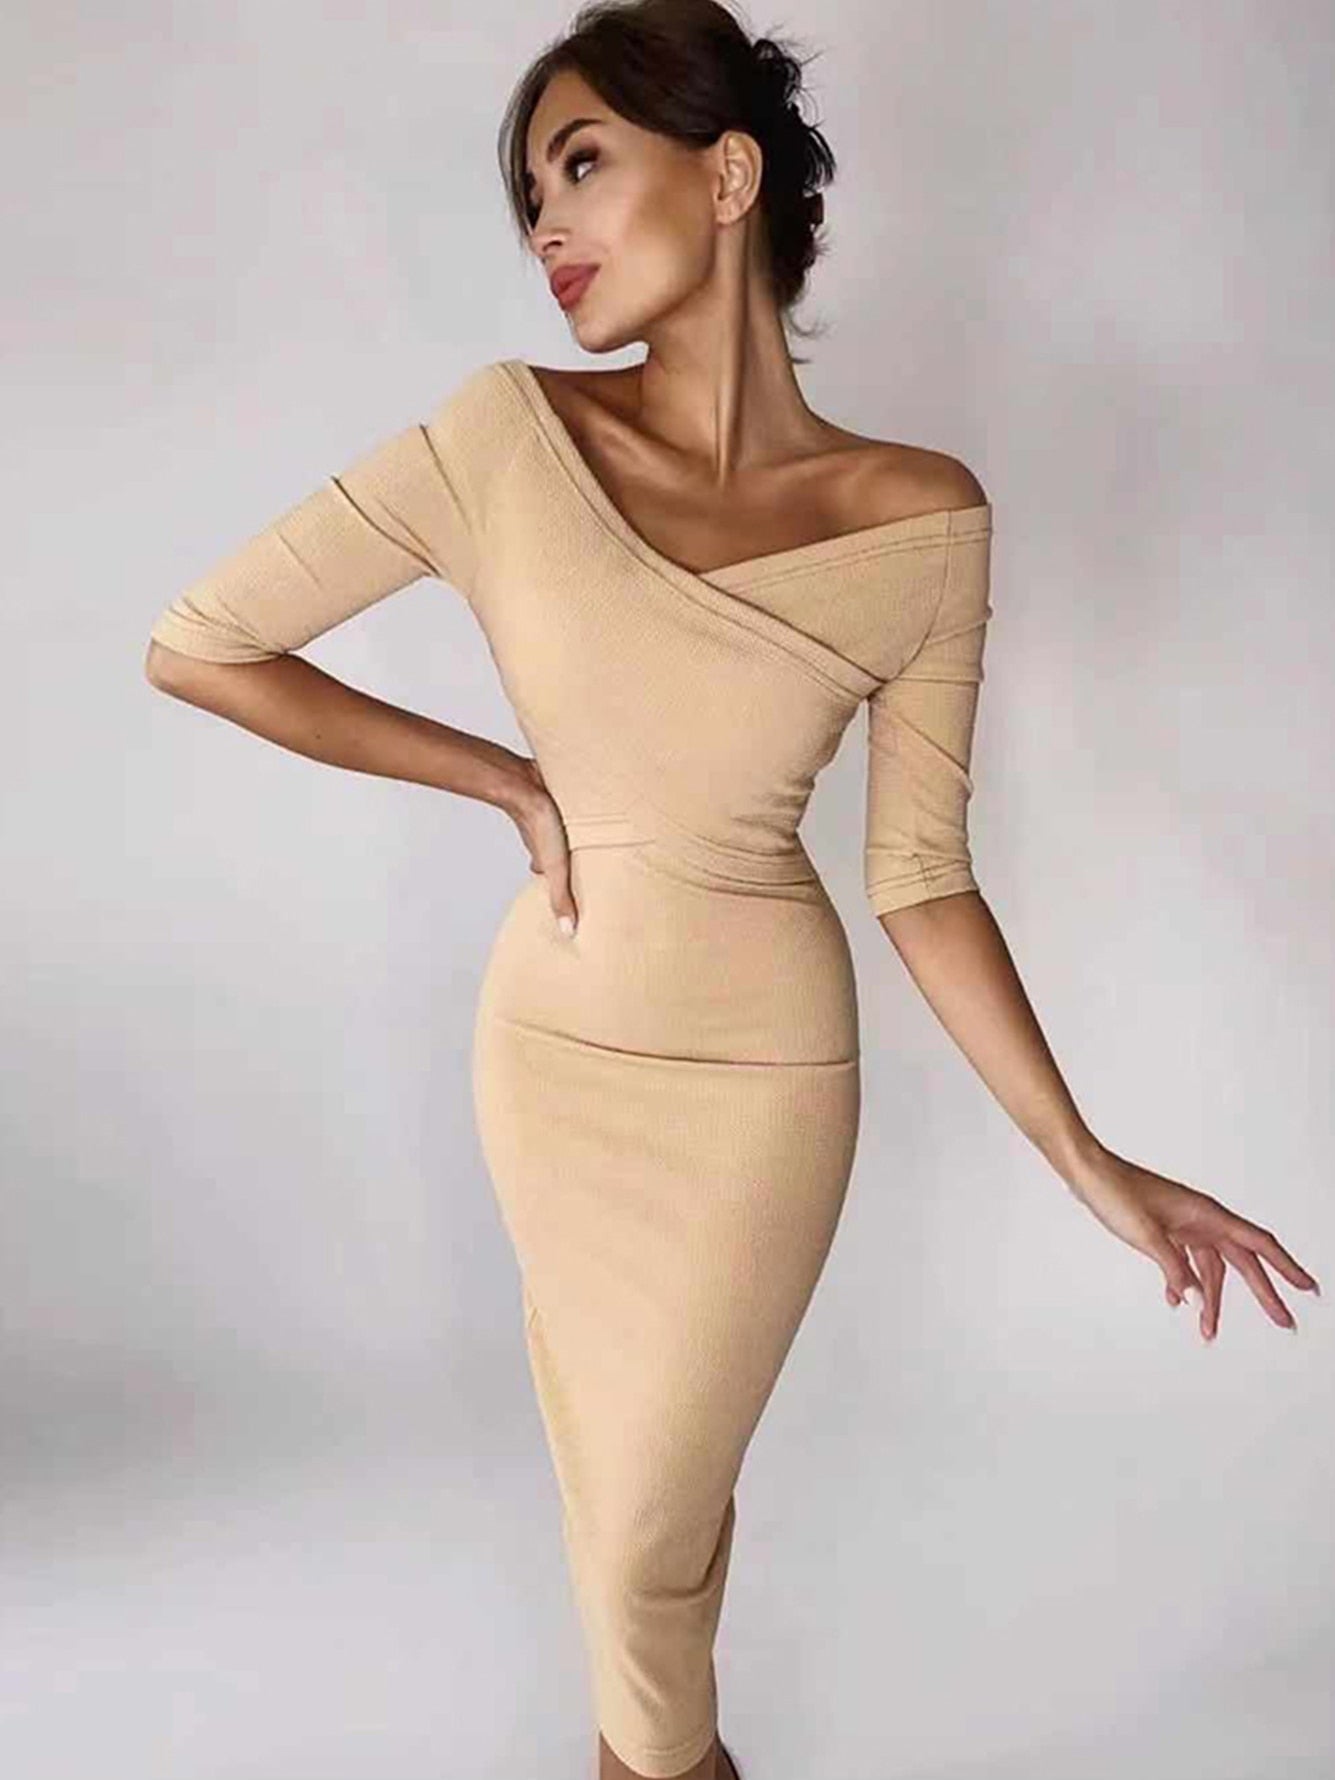 Clacive New Autumn Red One Shoulder Long Sleeve Bandage Dress Women Sexy Hollow Out Club Midi Celebrity Runway Party Dress Vestido